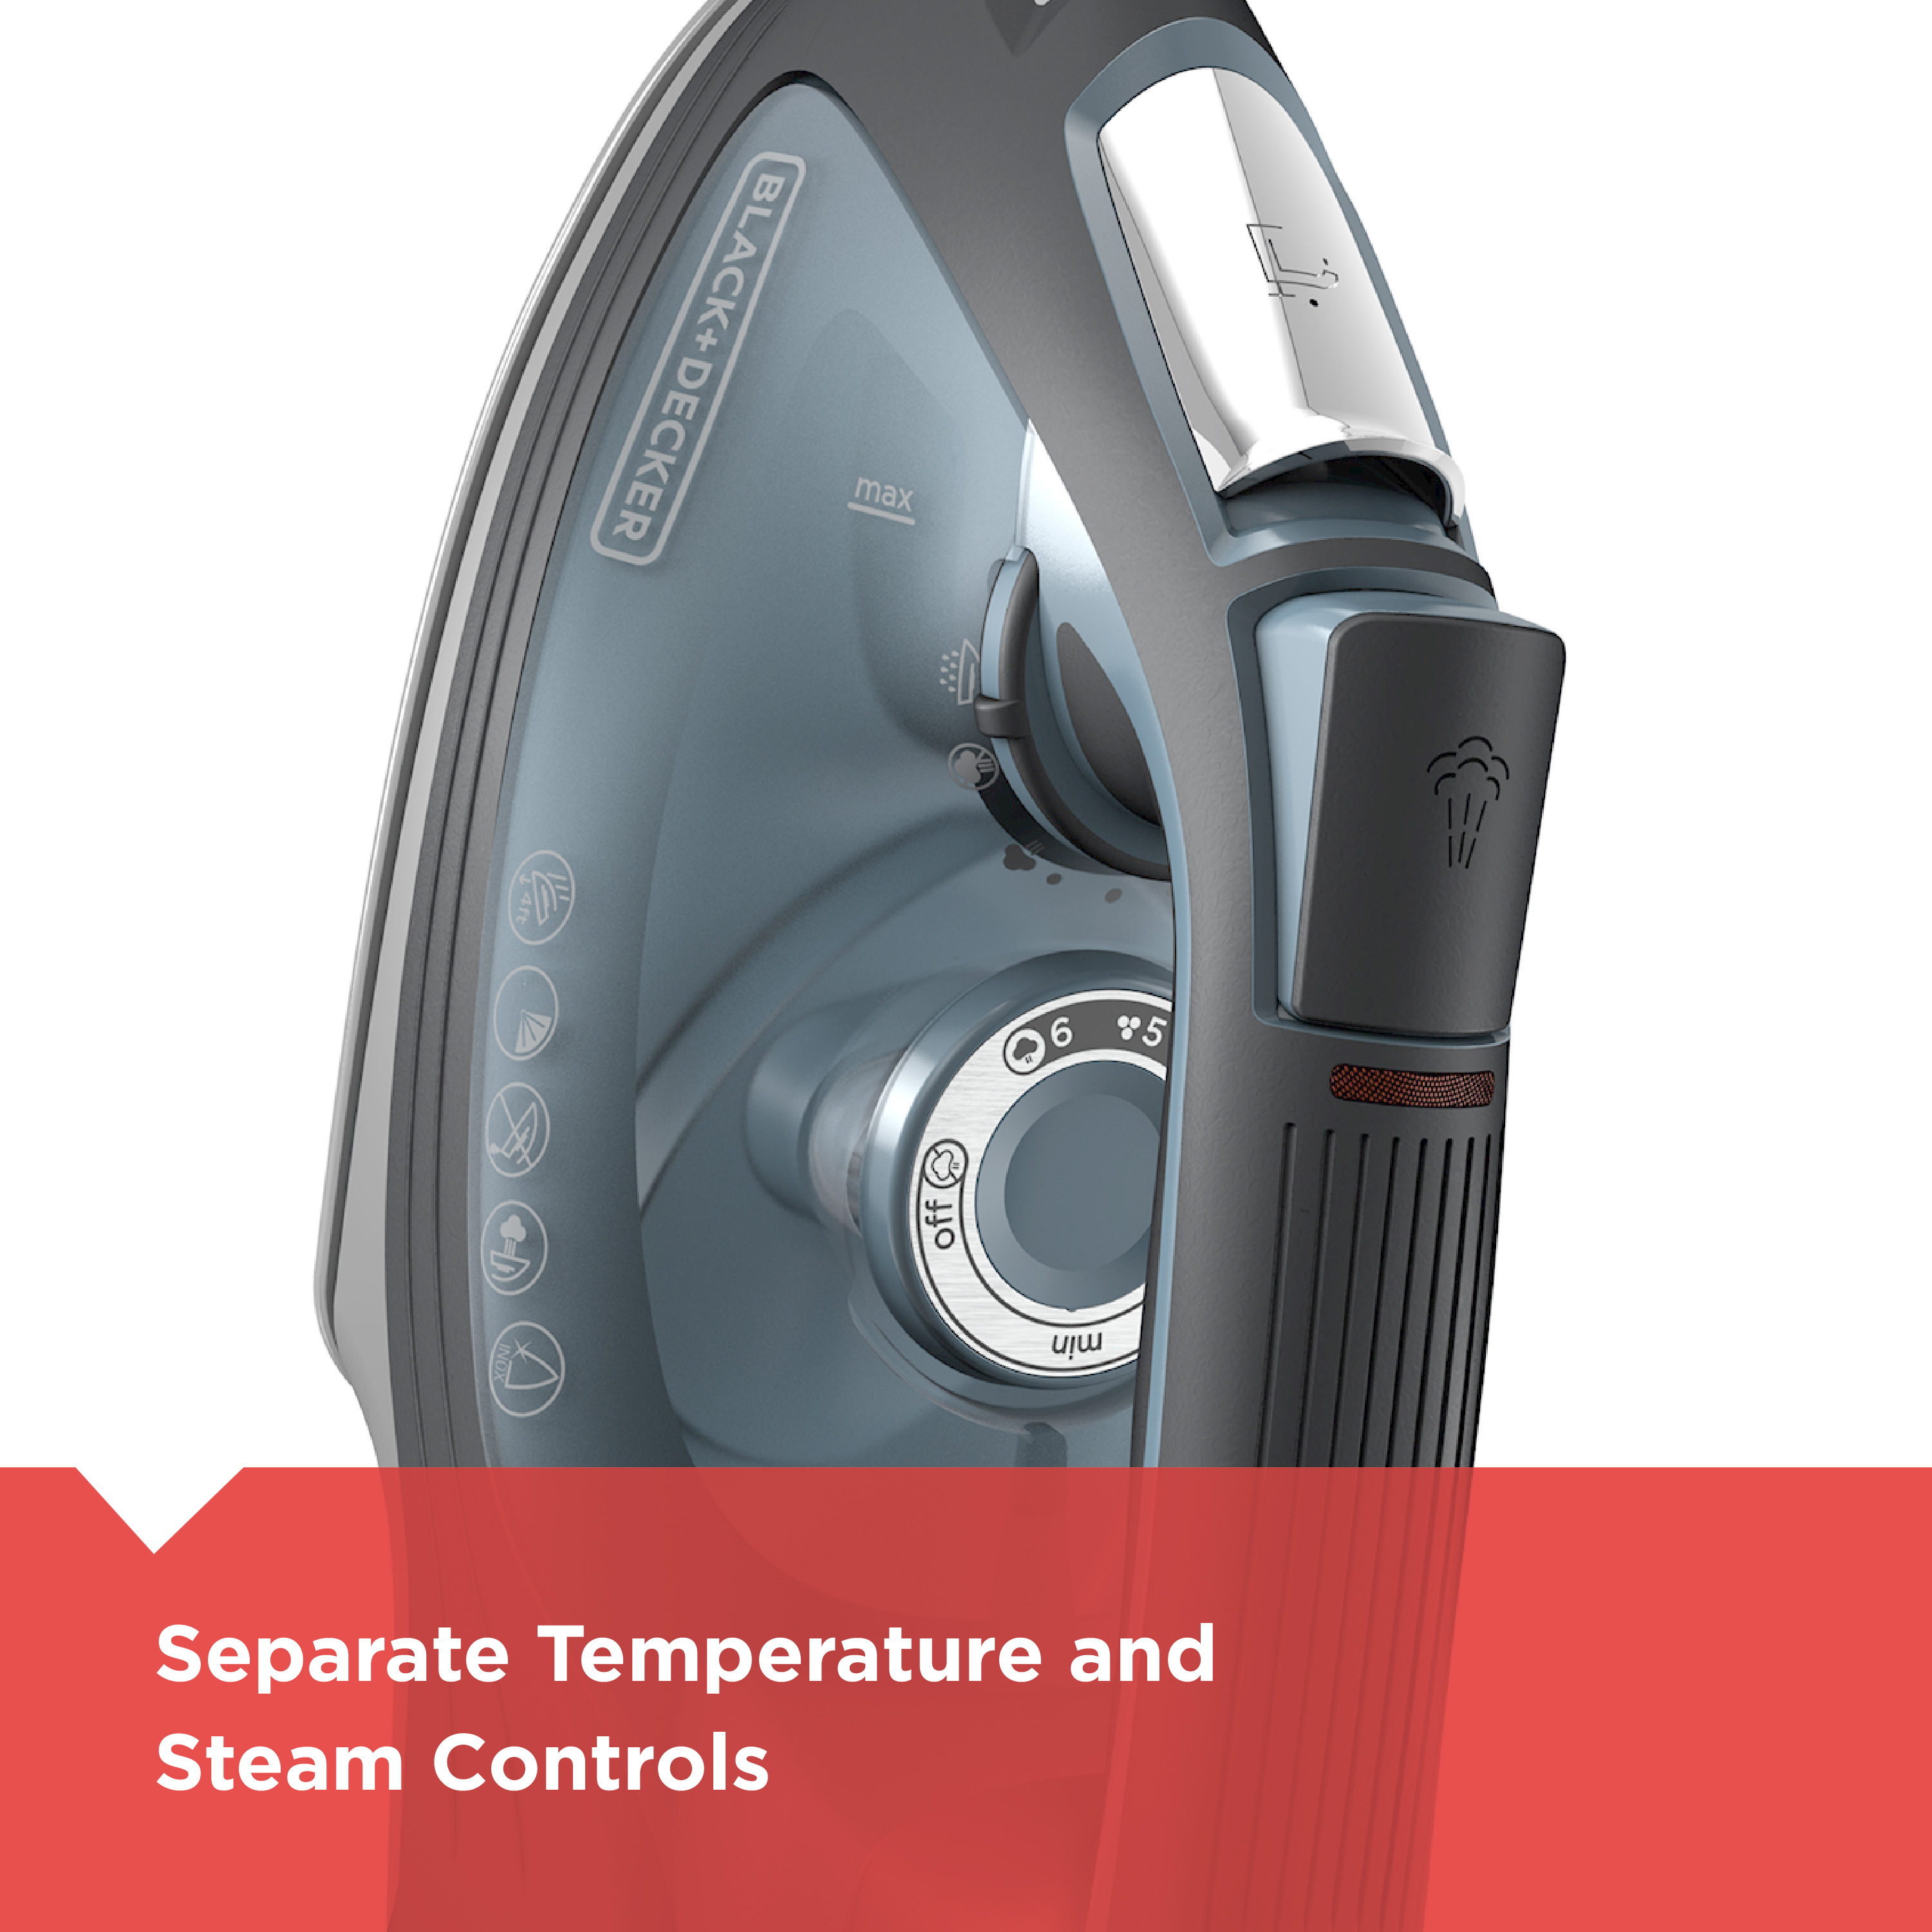 BLACK+DECKER IMPACT Advanced Steam Iron with Maximum Durability and 360° Pivoting Cord, Gray, IR3000 - image 3 of 11